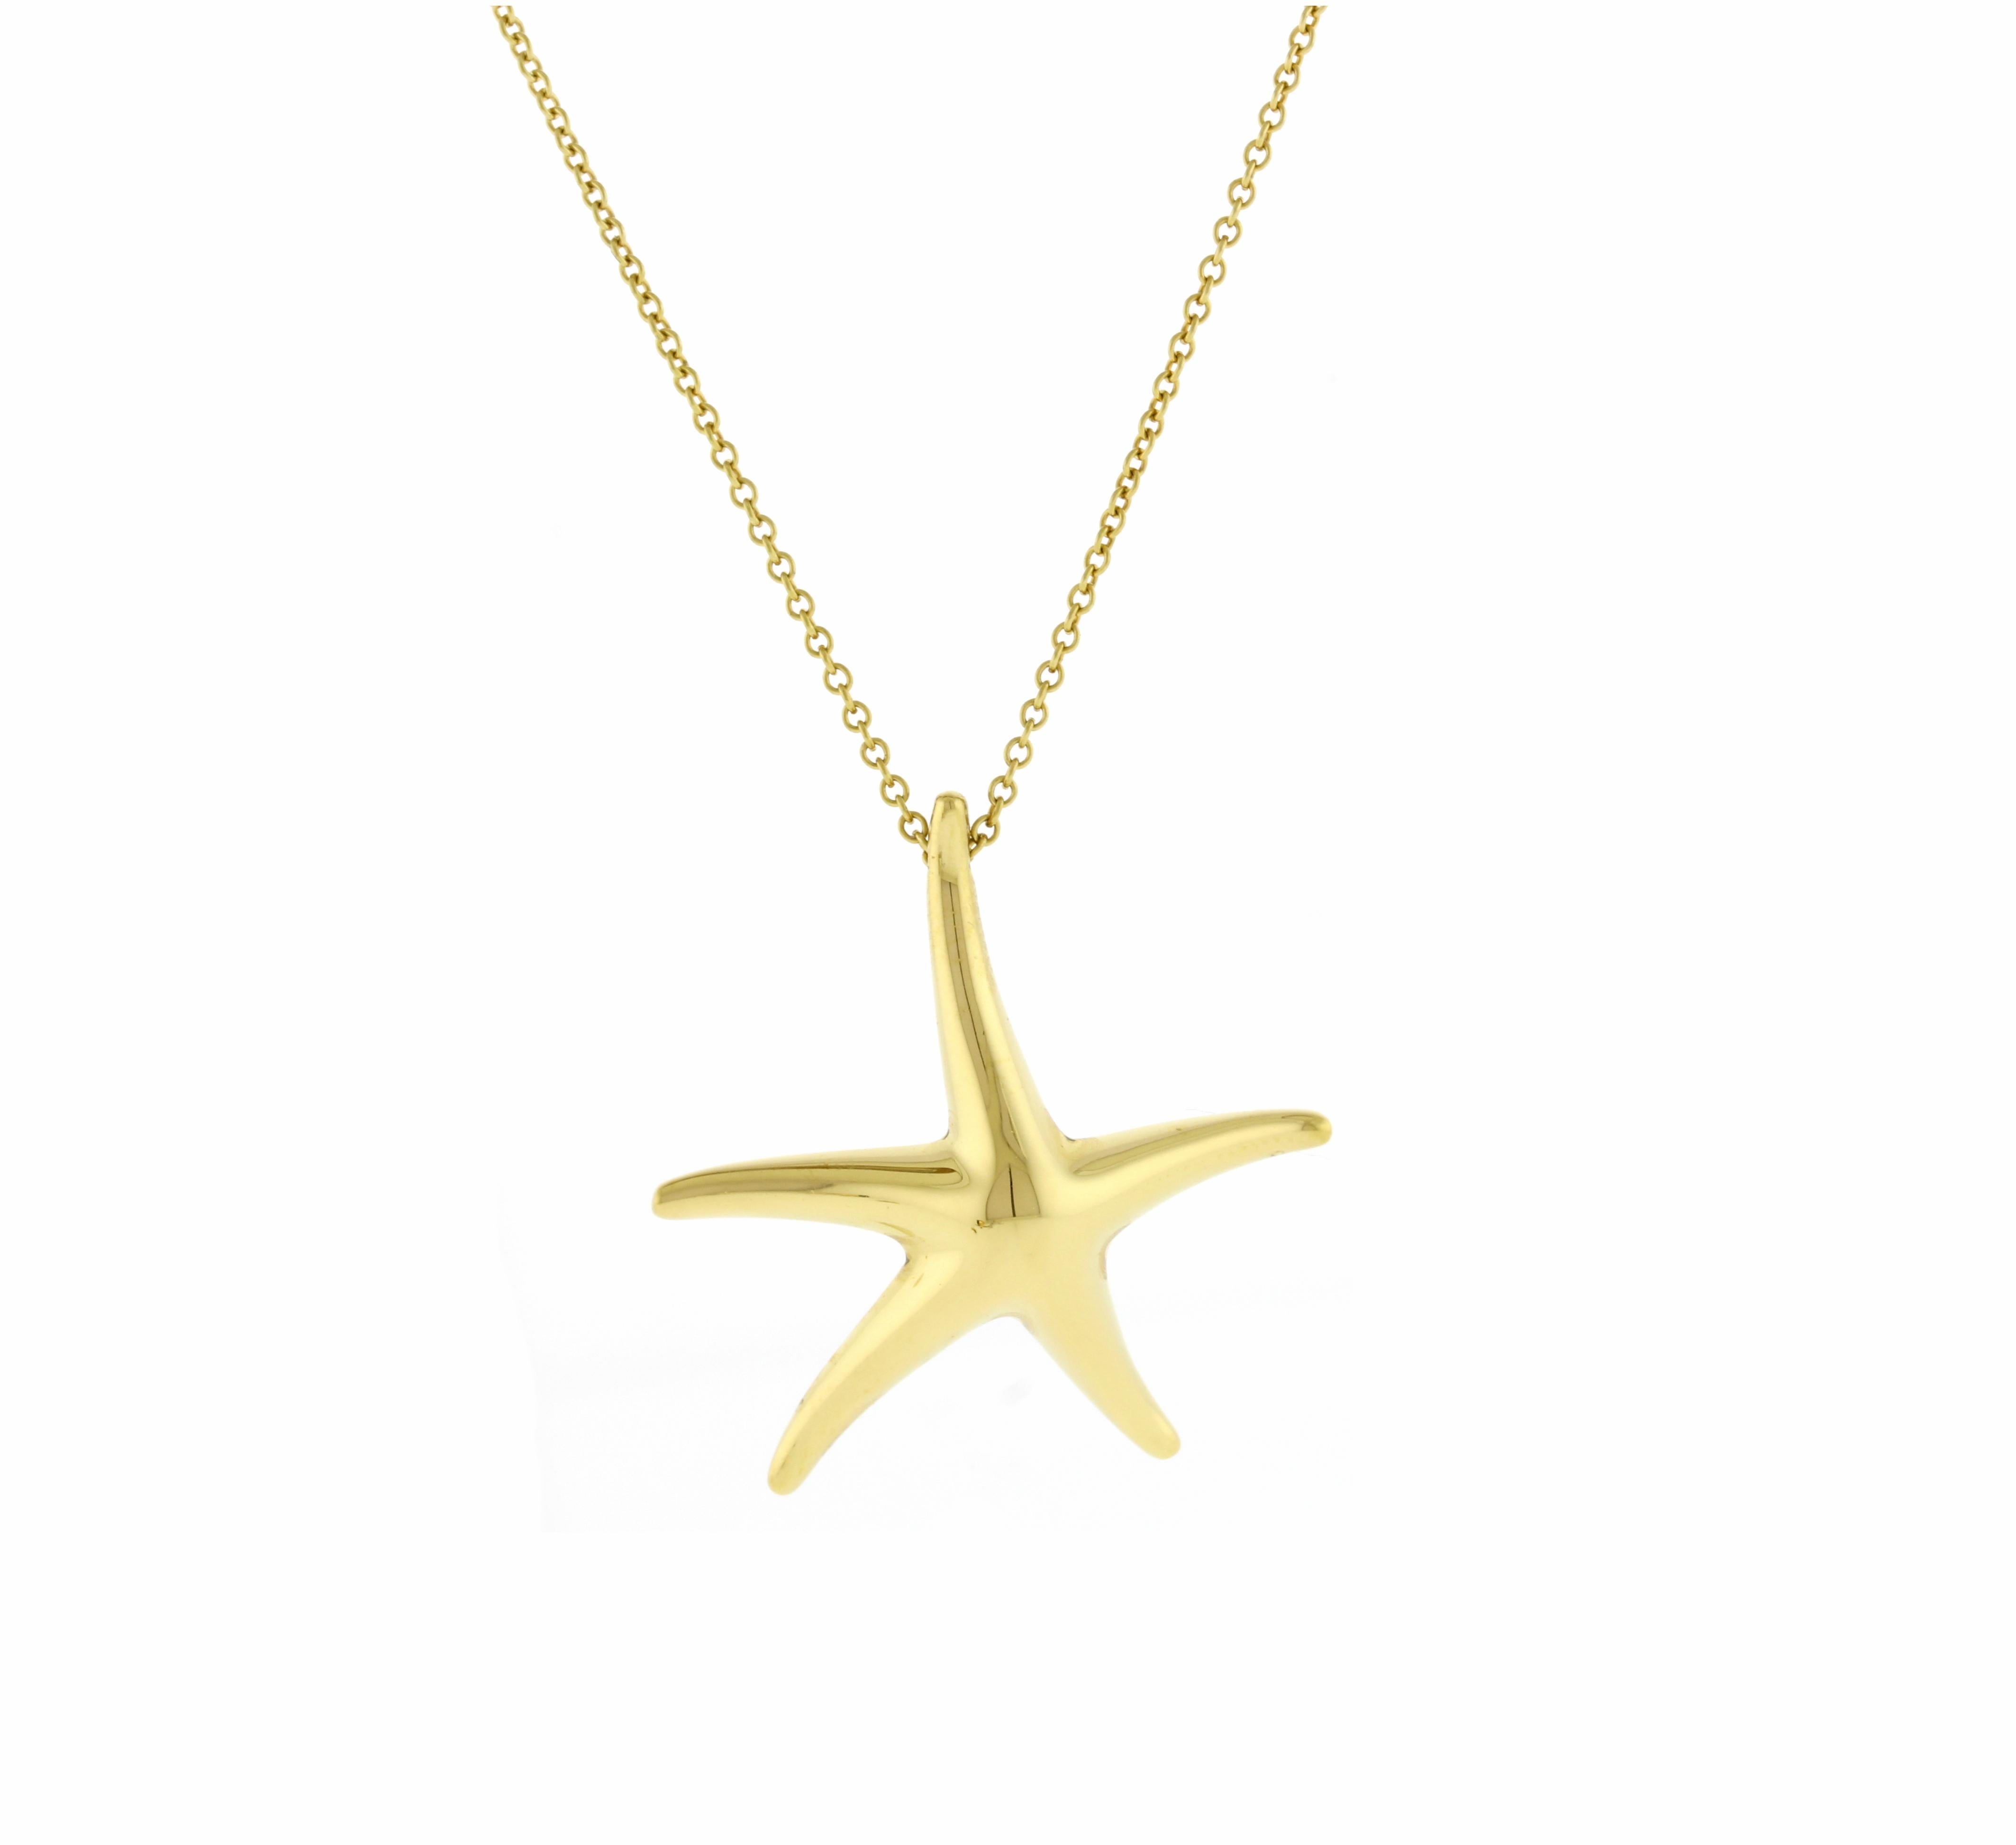 From one of Tiffany & Co most recognized designer; Elsa Peretti, her starfish pendant necklace. The necklace is 18 karat yellow gold on an 18 inch long chain.
• Designer: Elsa Peretti for Tiffany & Co.
• Metal: 18 karat gold
• Circa: Circa 1990s
•